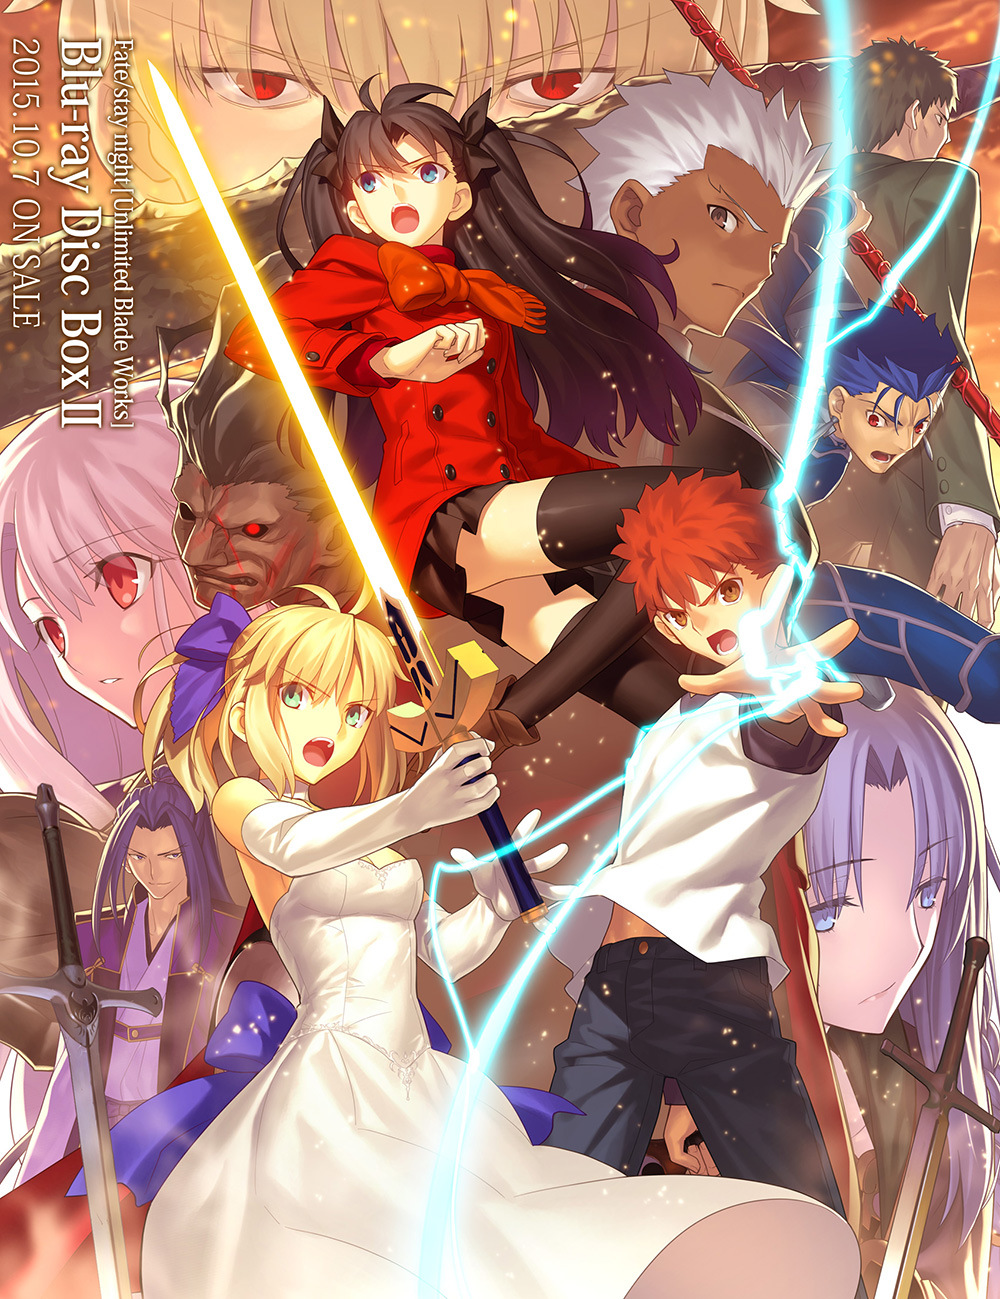 Fate-stay-night-Unlimited-Blade-Works-Blu-ray-Box-2-Visual